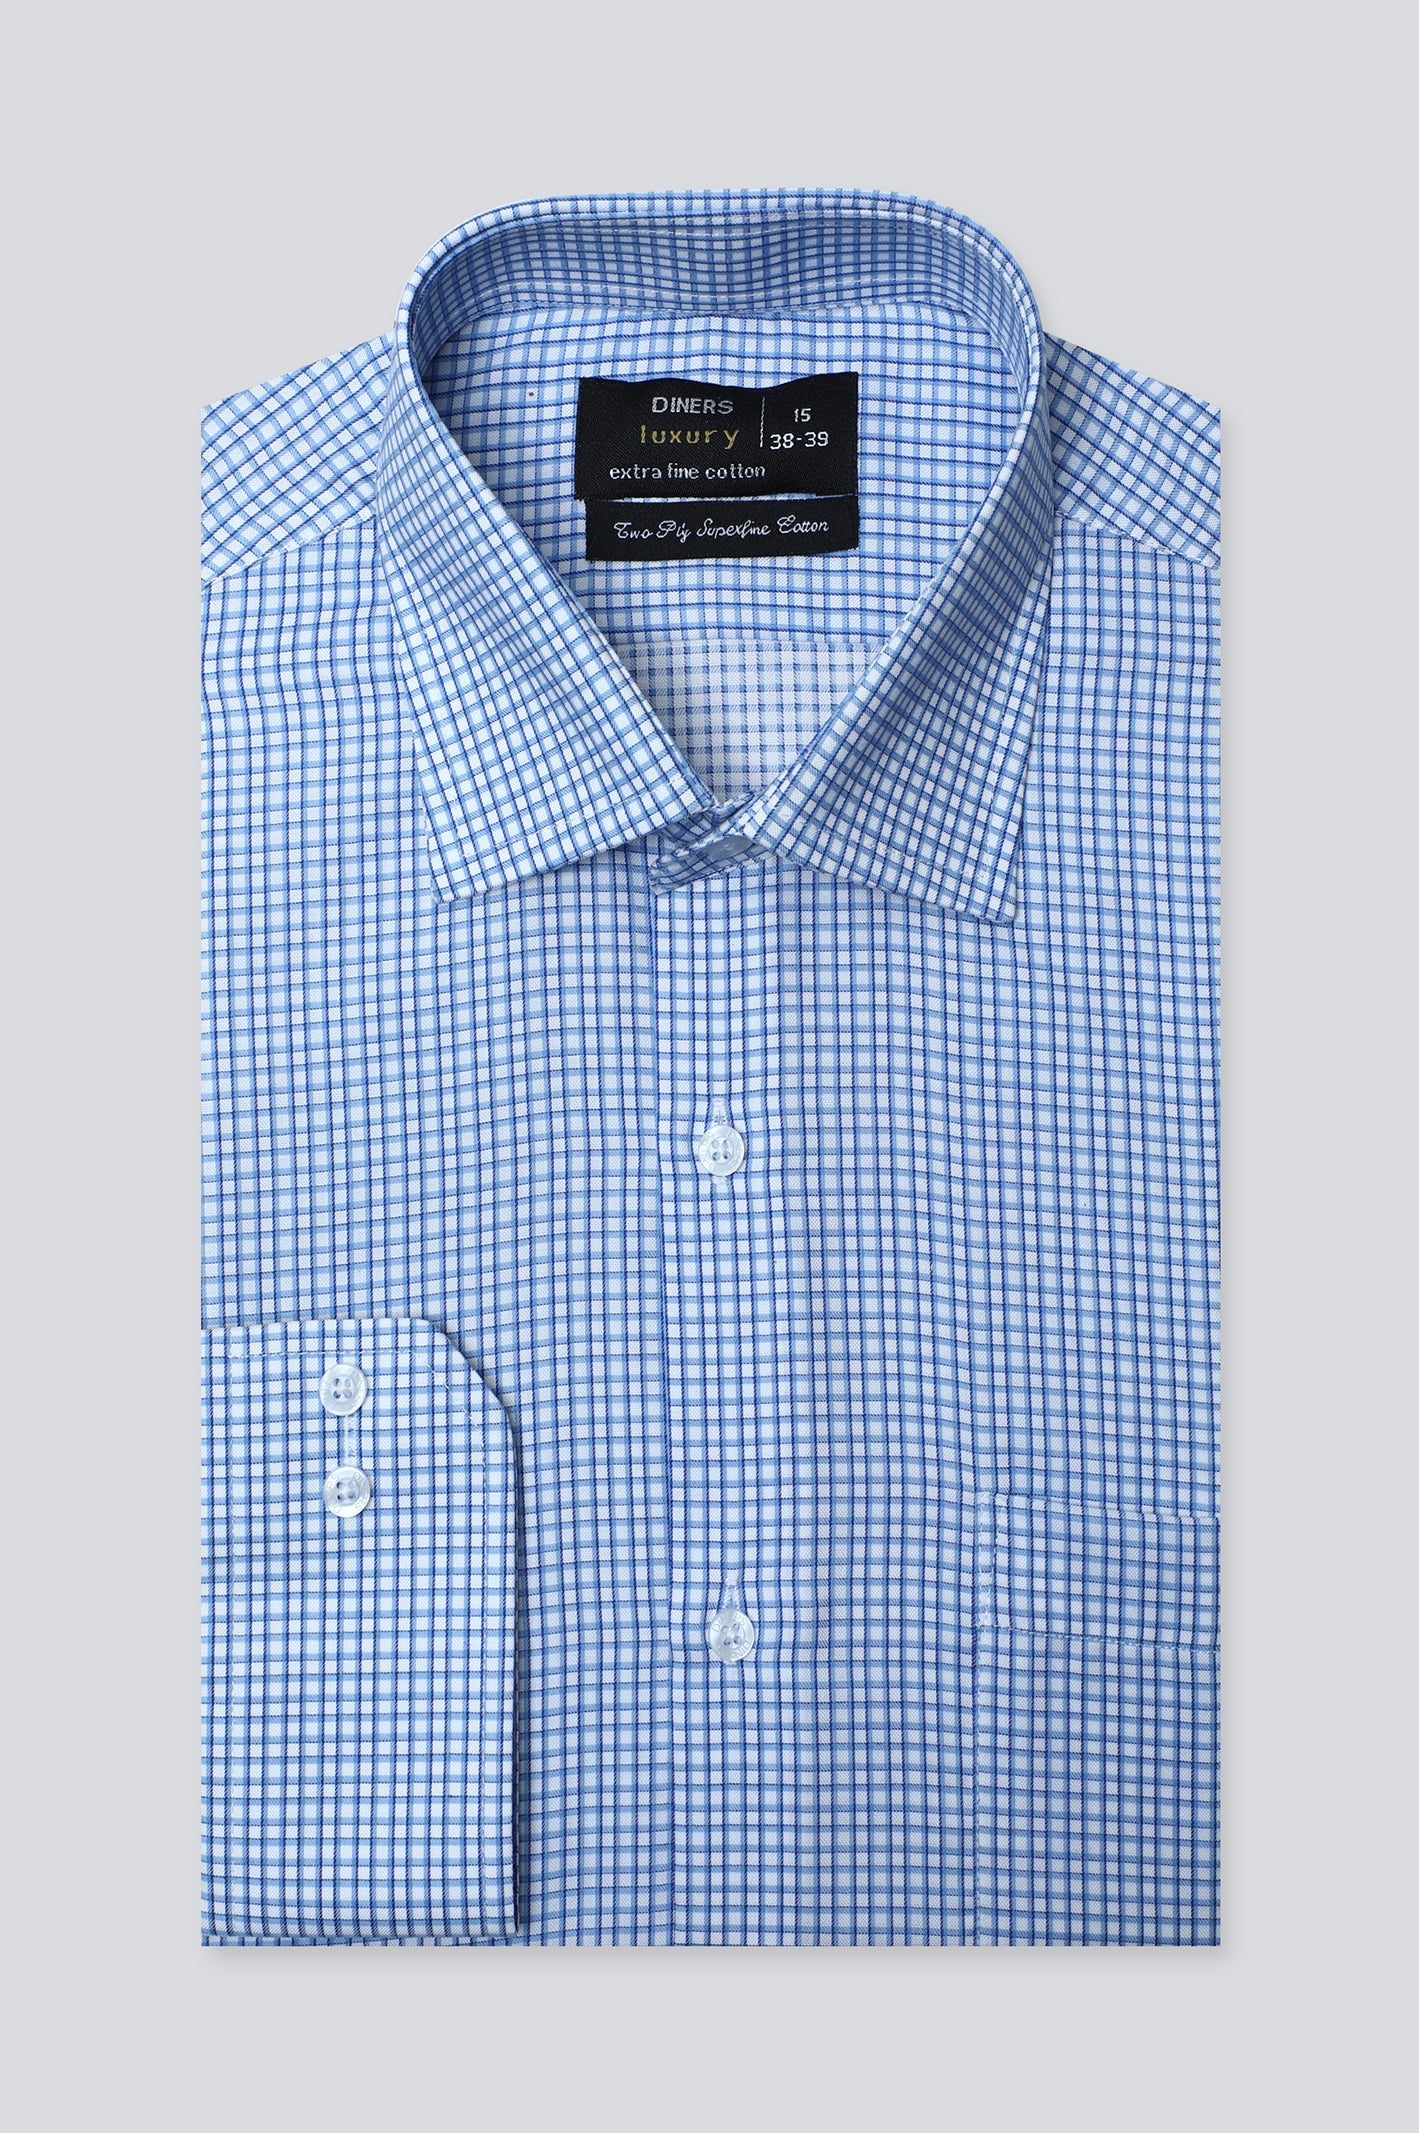 Blue Pin Check Formal Shirt For Men - Diners